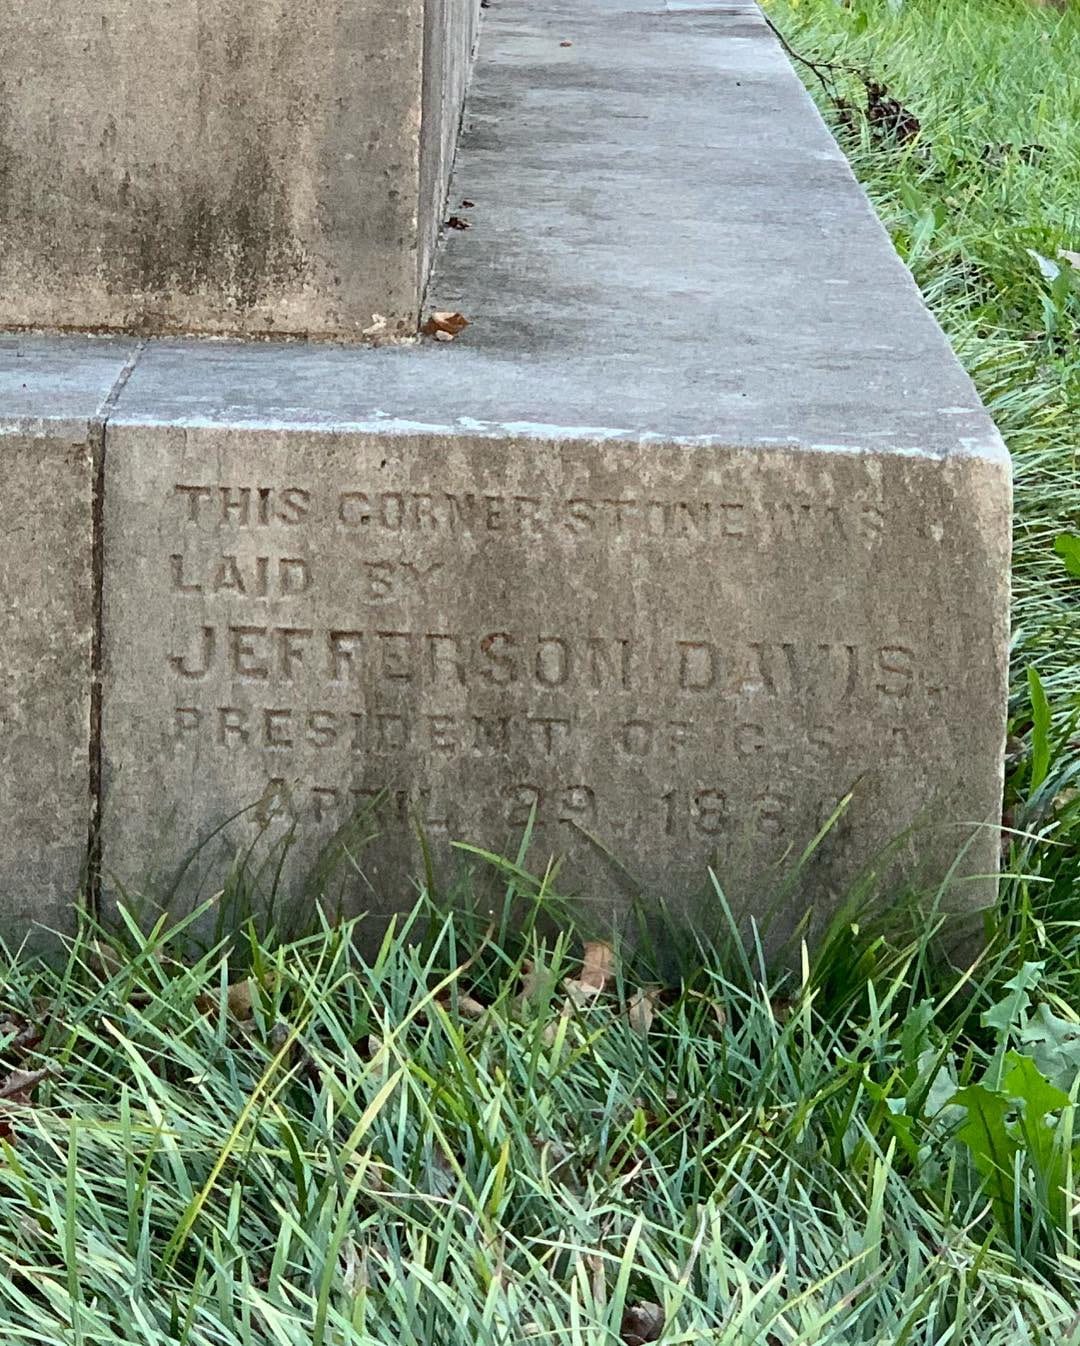 Detail showing inscription which reads "the cornerstone laid by Jefferson Davis 1886"